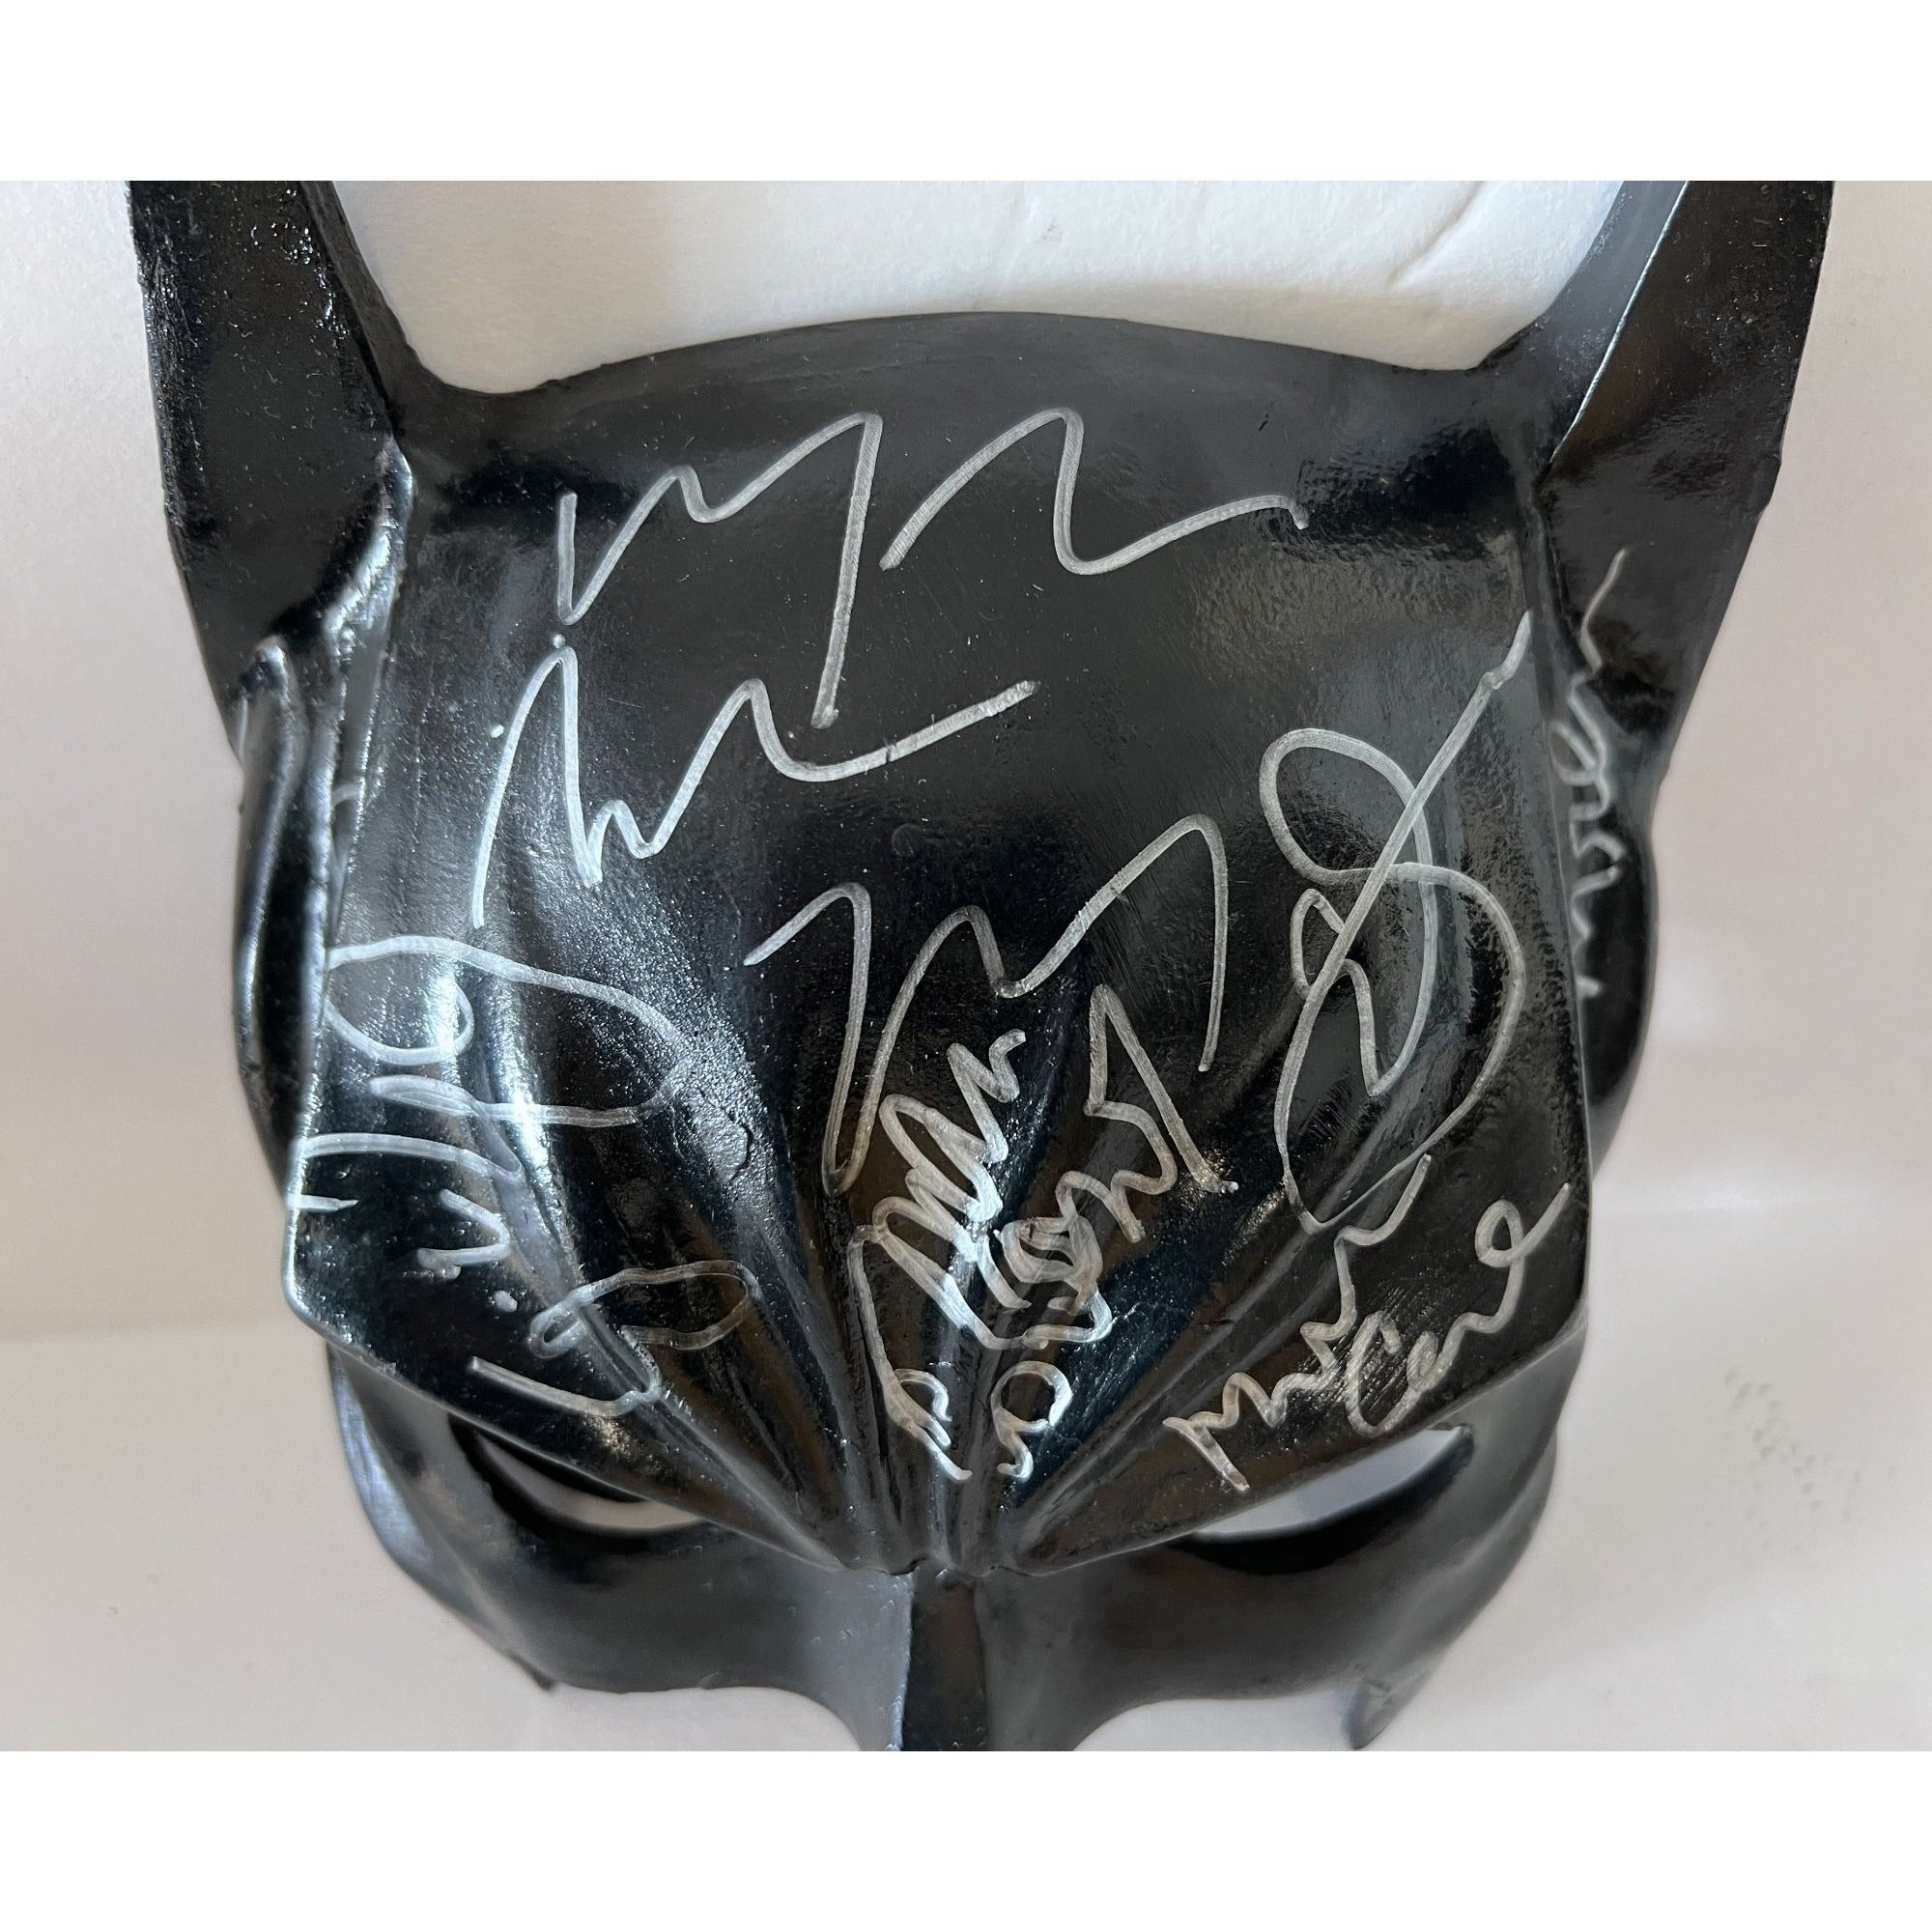 The Dark Knight Batman cast signed mask with proof he's Ledger Christian Bale Michael Caine Morgan Freeman